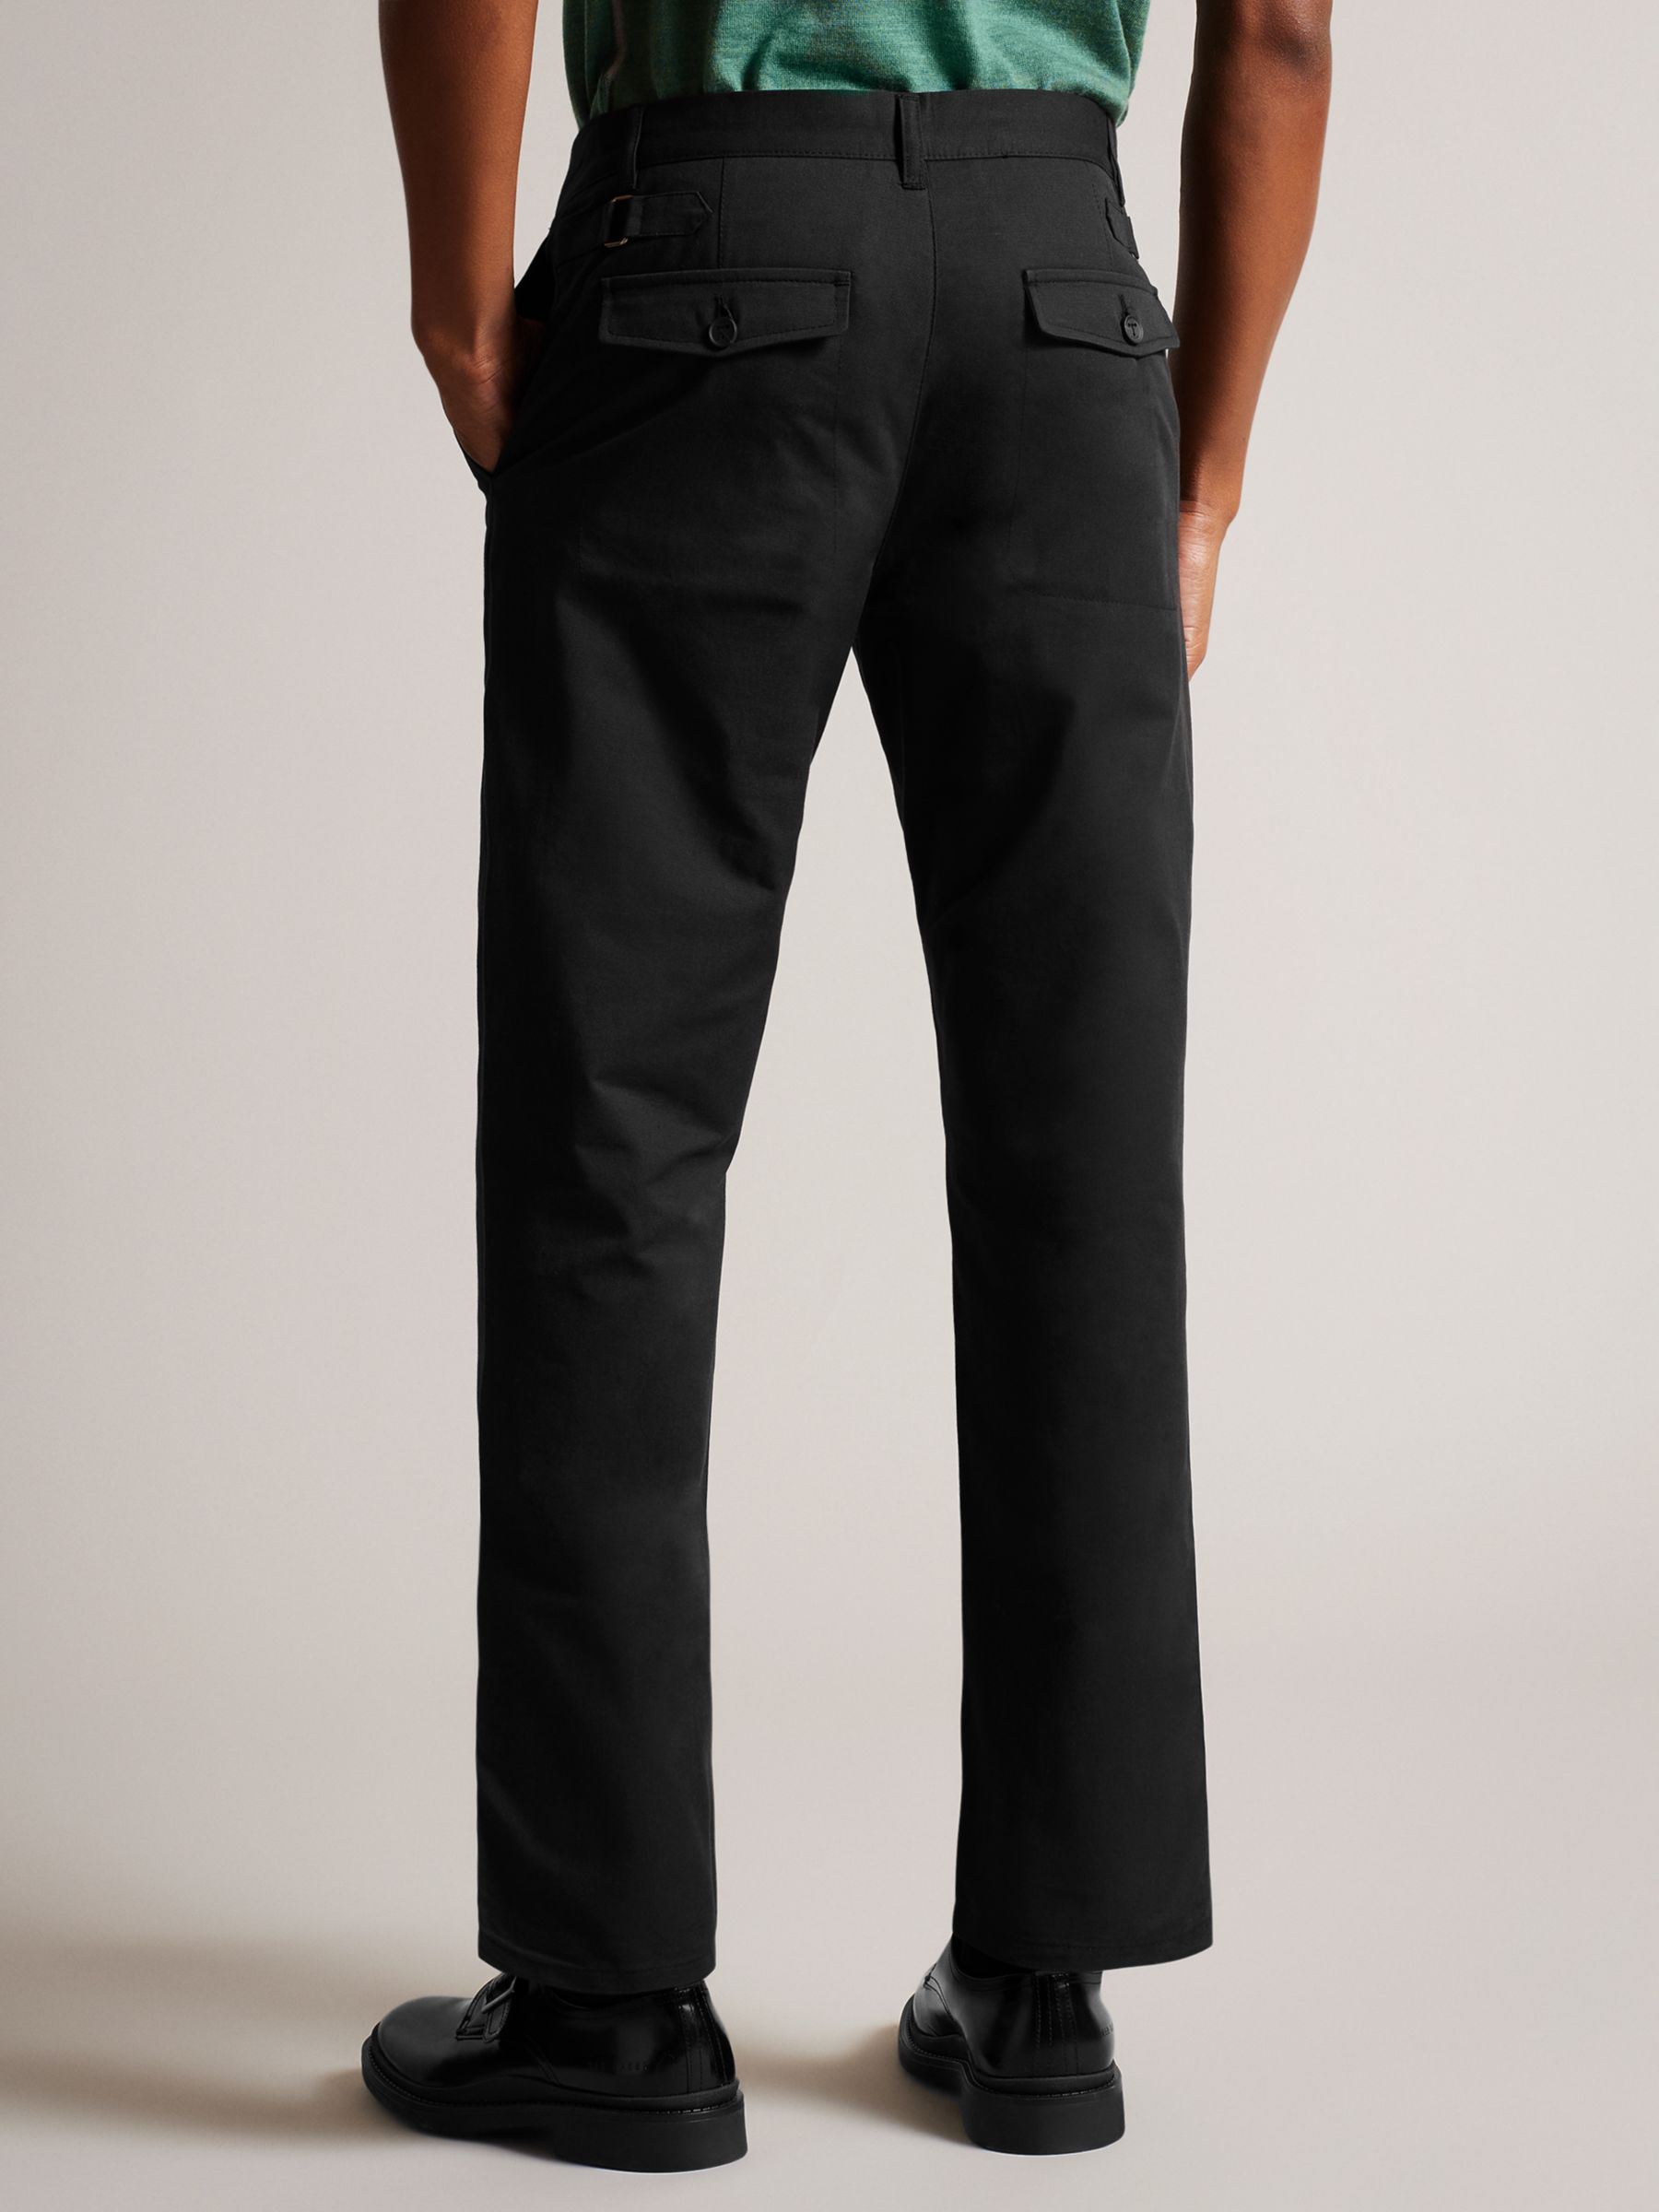 Ted Baker Vedra Tailored Trousers, Black, 28R